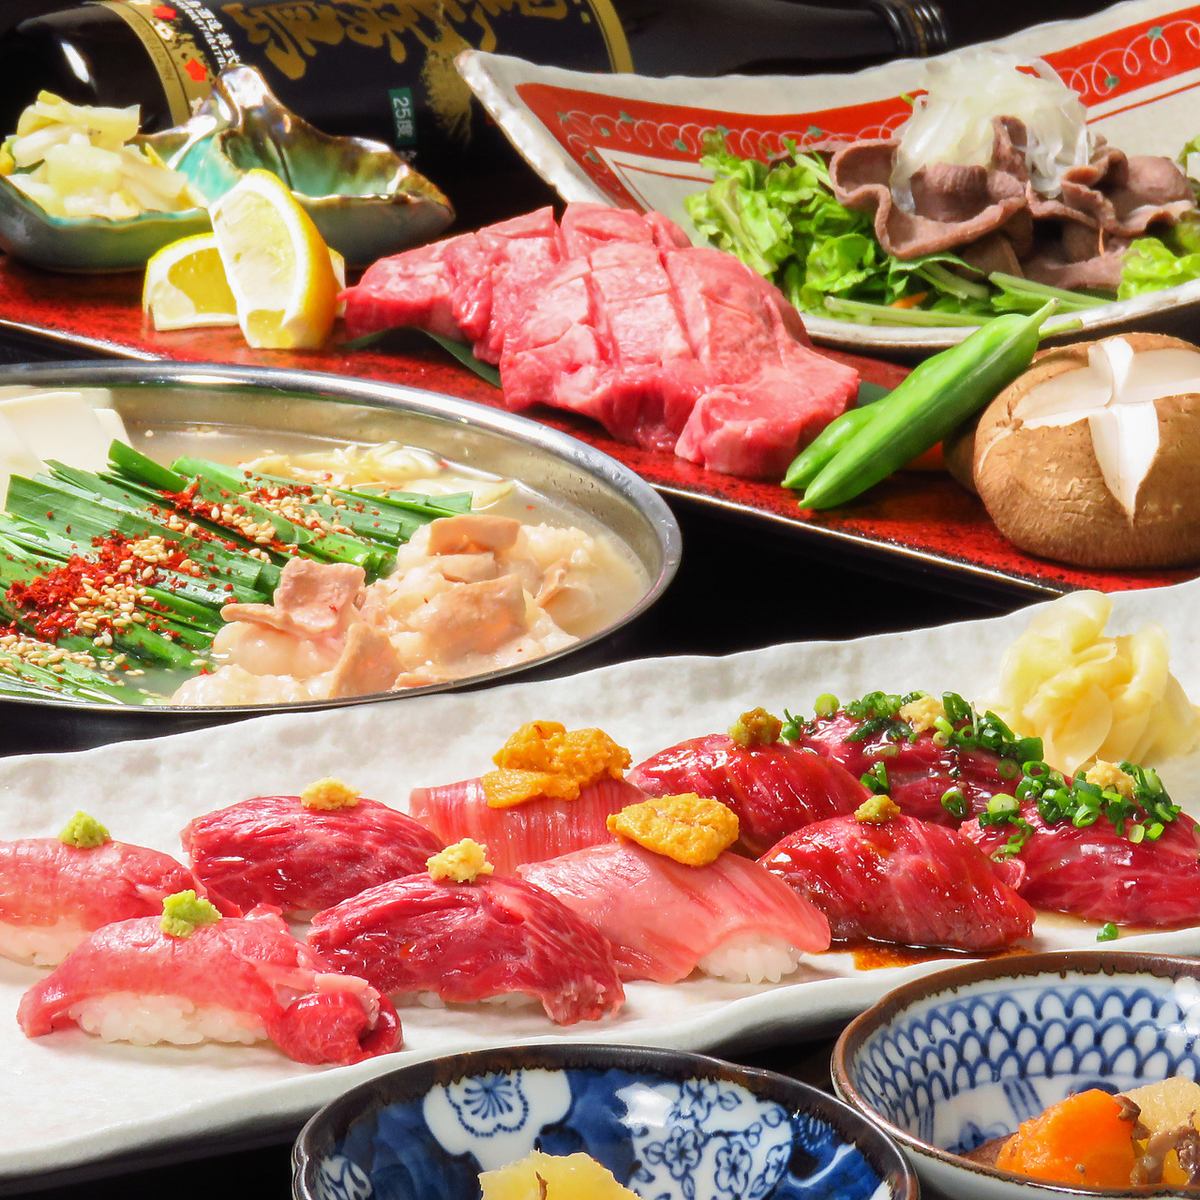 If you want to eat meat in Nakasu, go to "Tanbaku".We offer a wide variety of meat dishes that we are proud of!